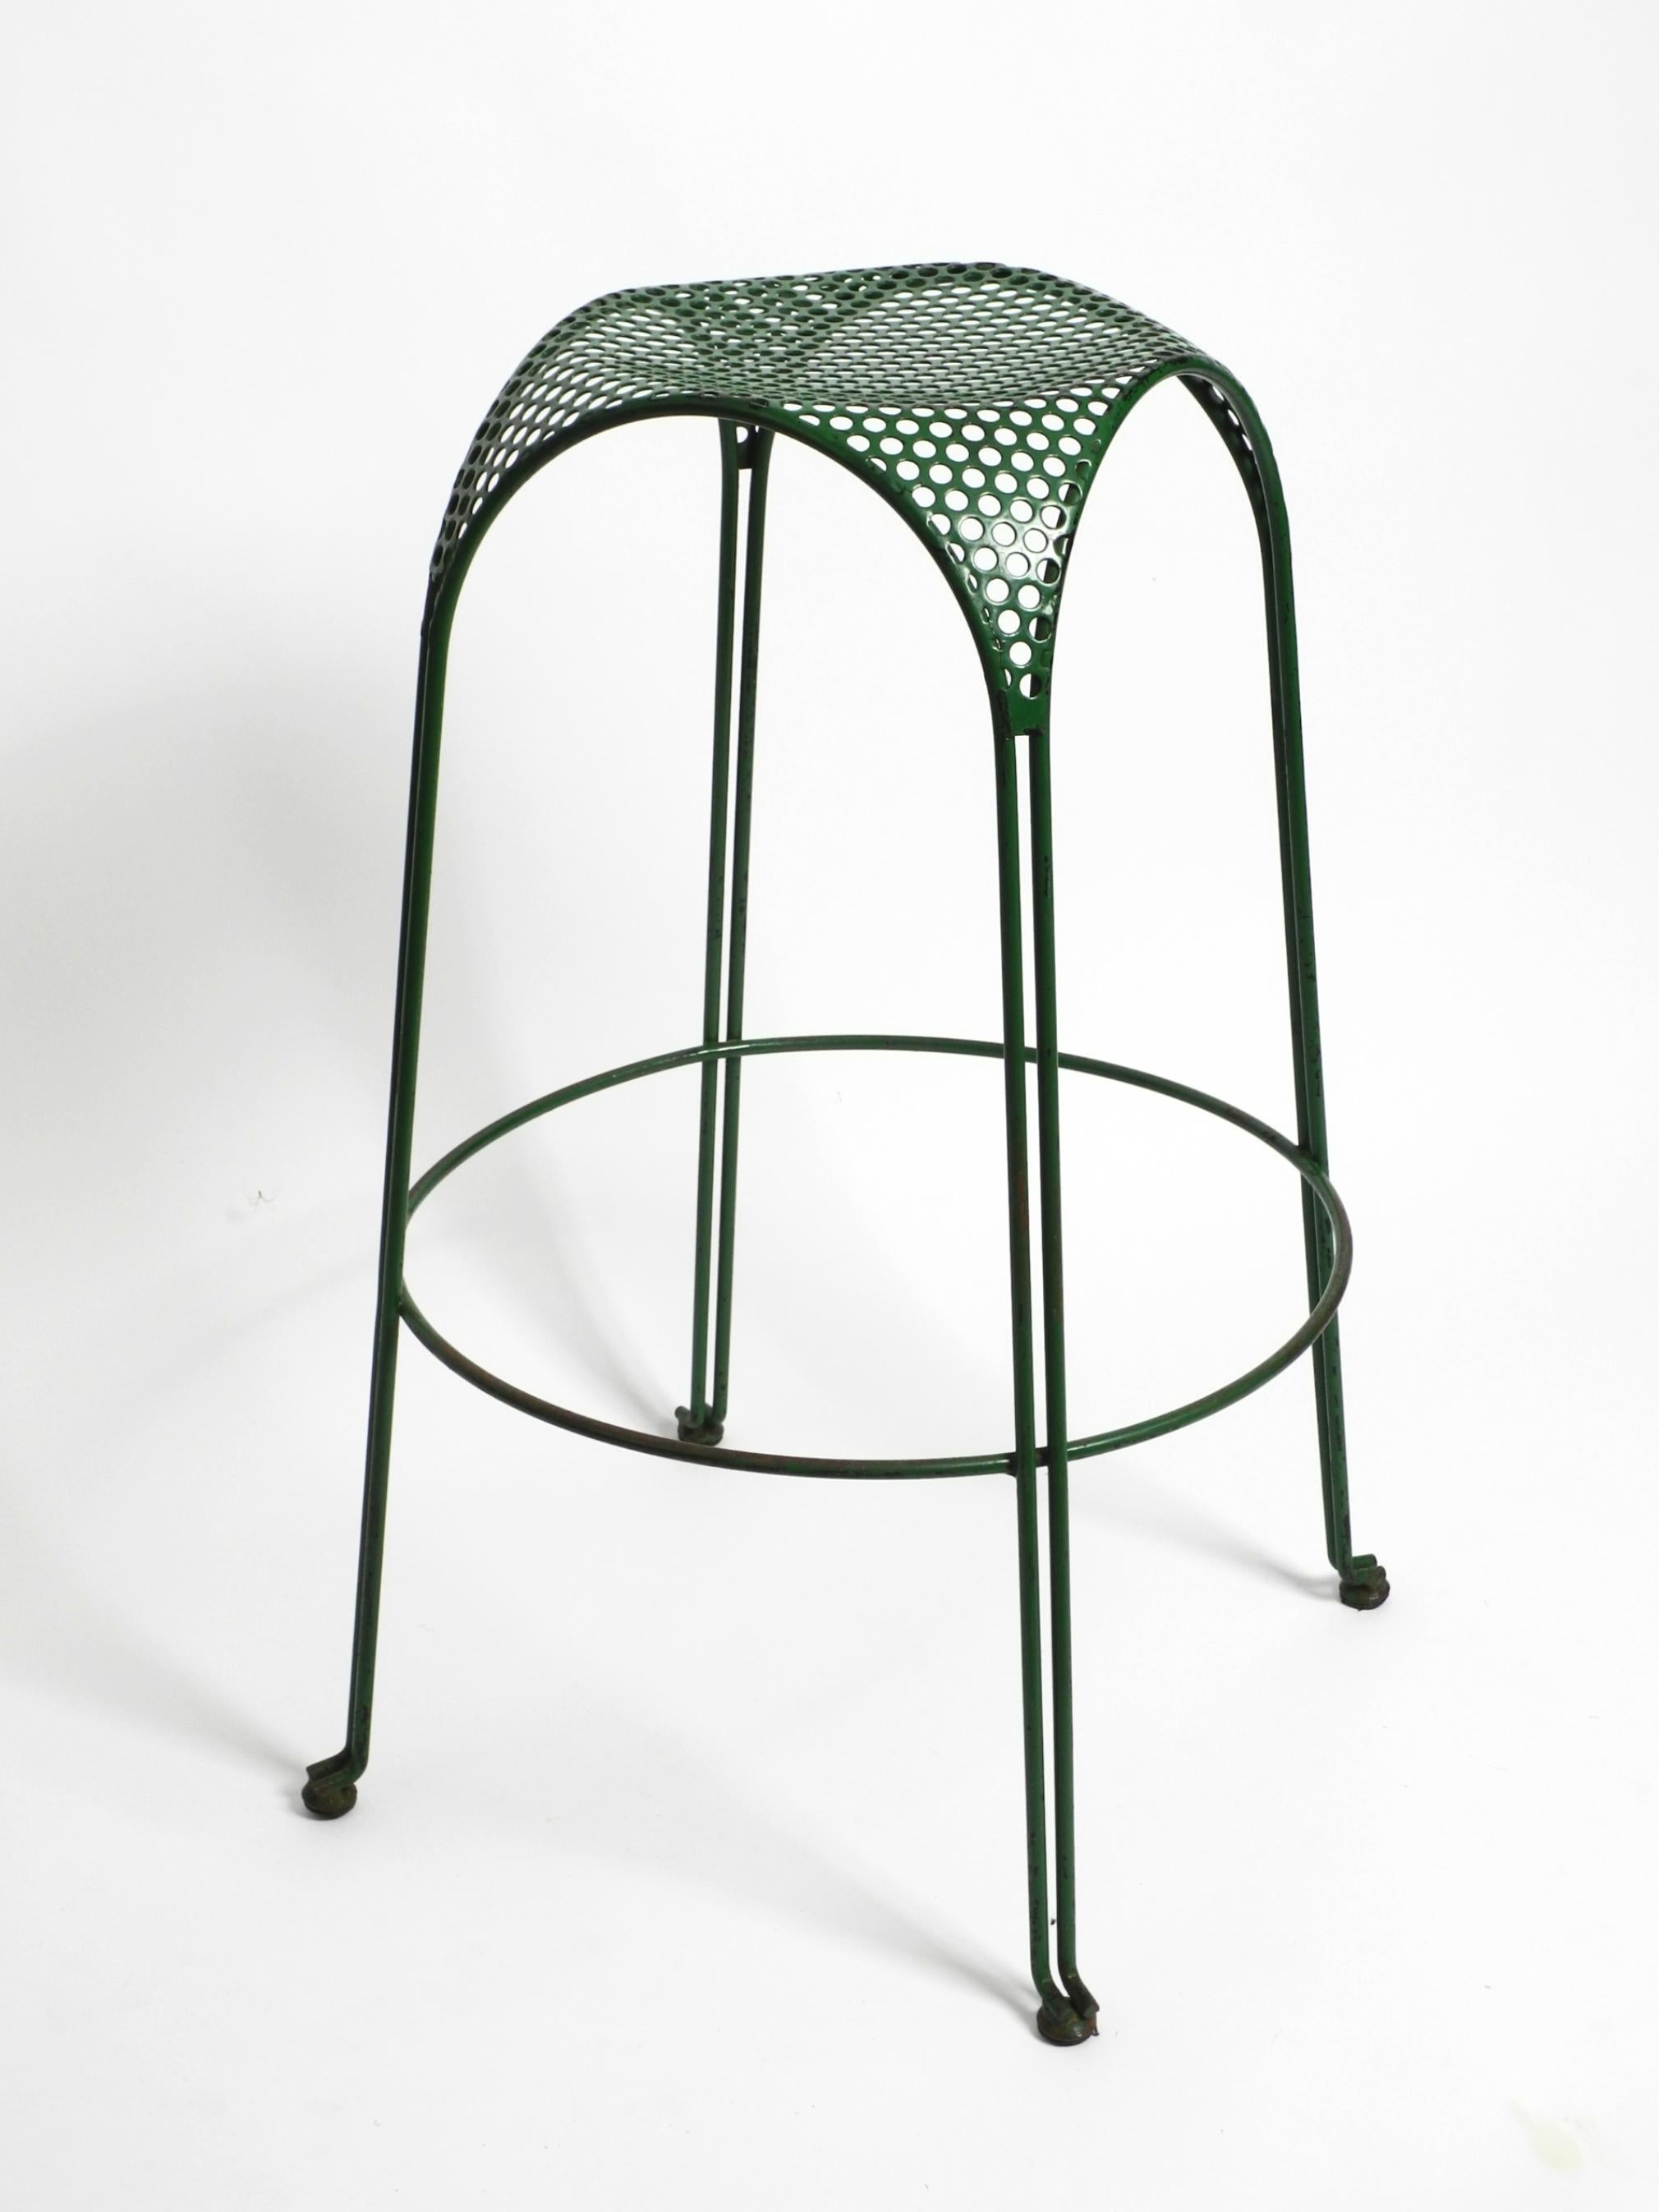 Italian 1960s bar stool made of green painted metal with perforated metal seat In Good Condition For Sale In München, DE